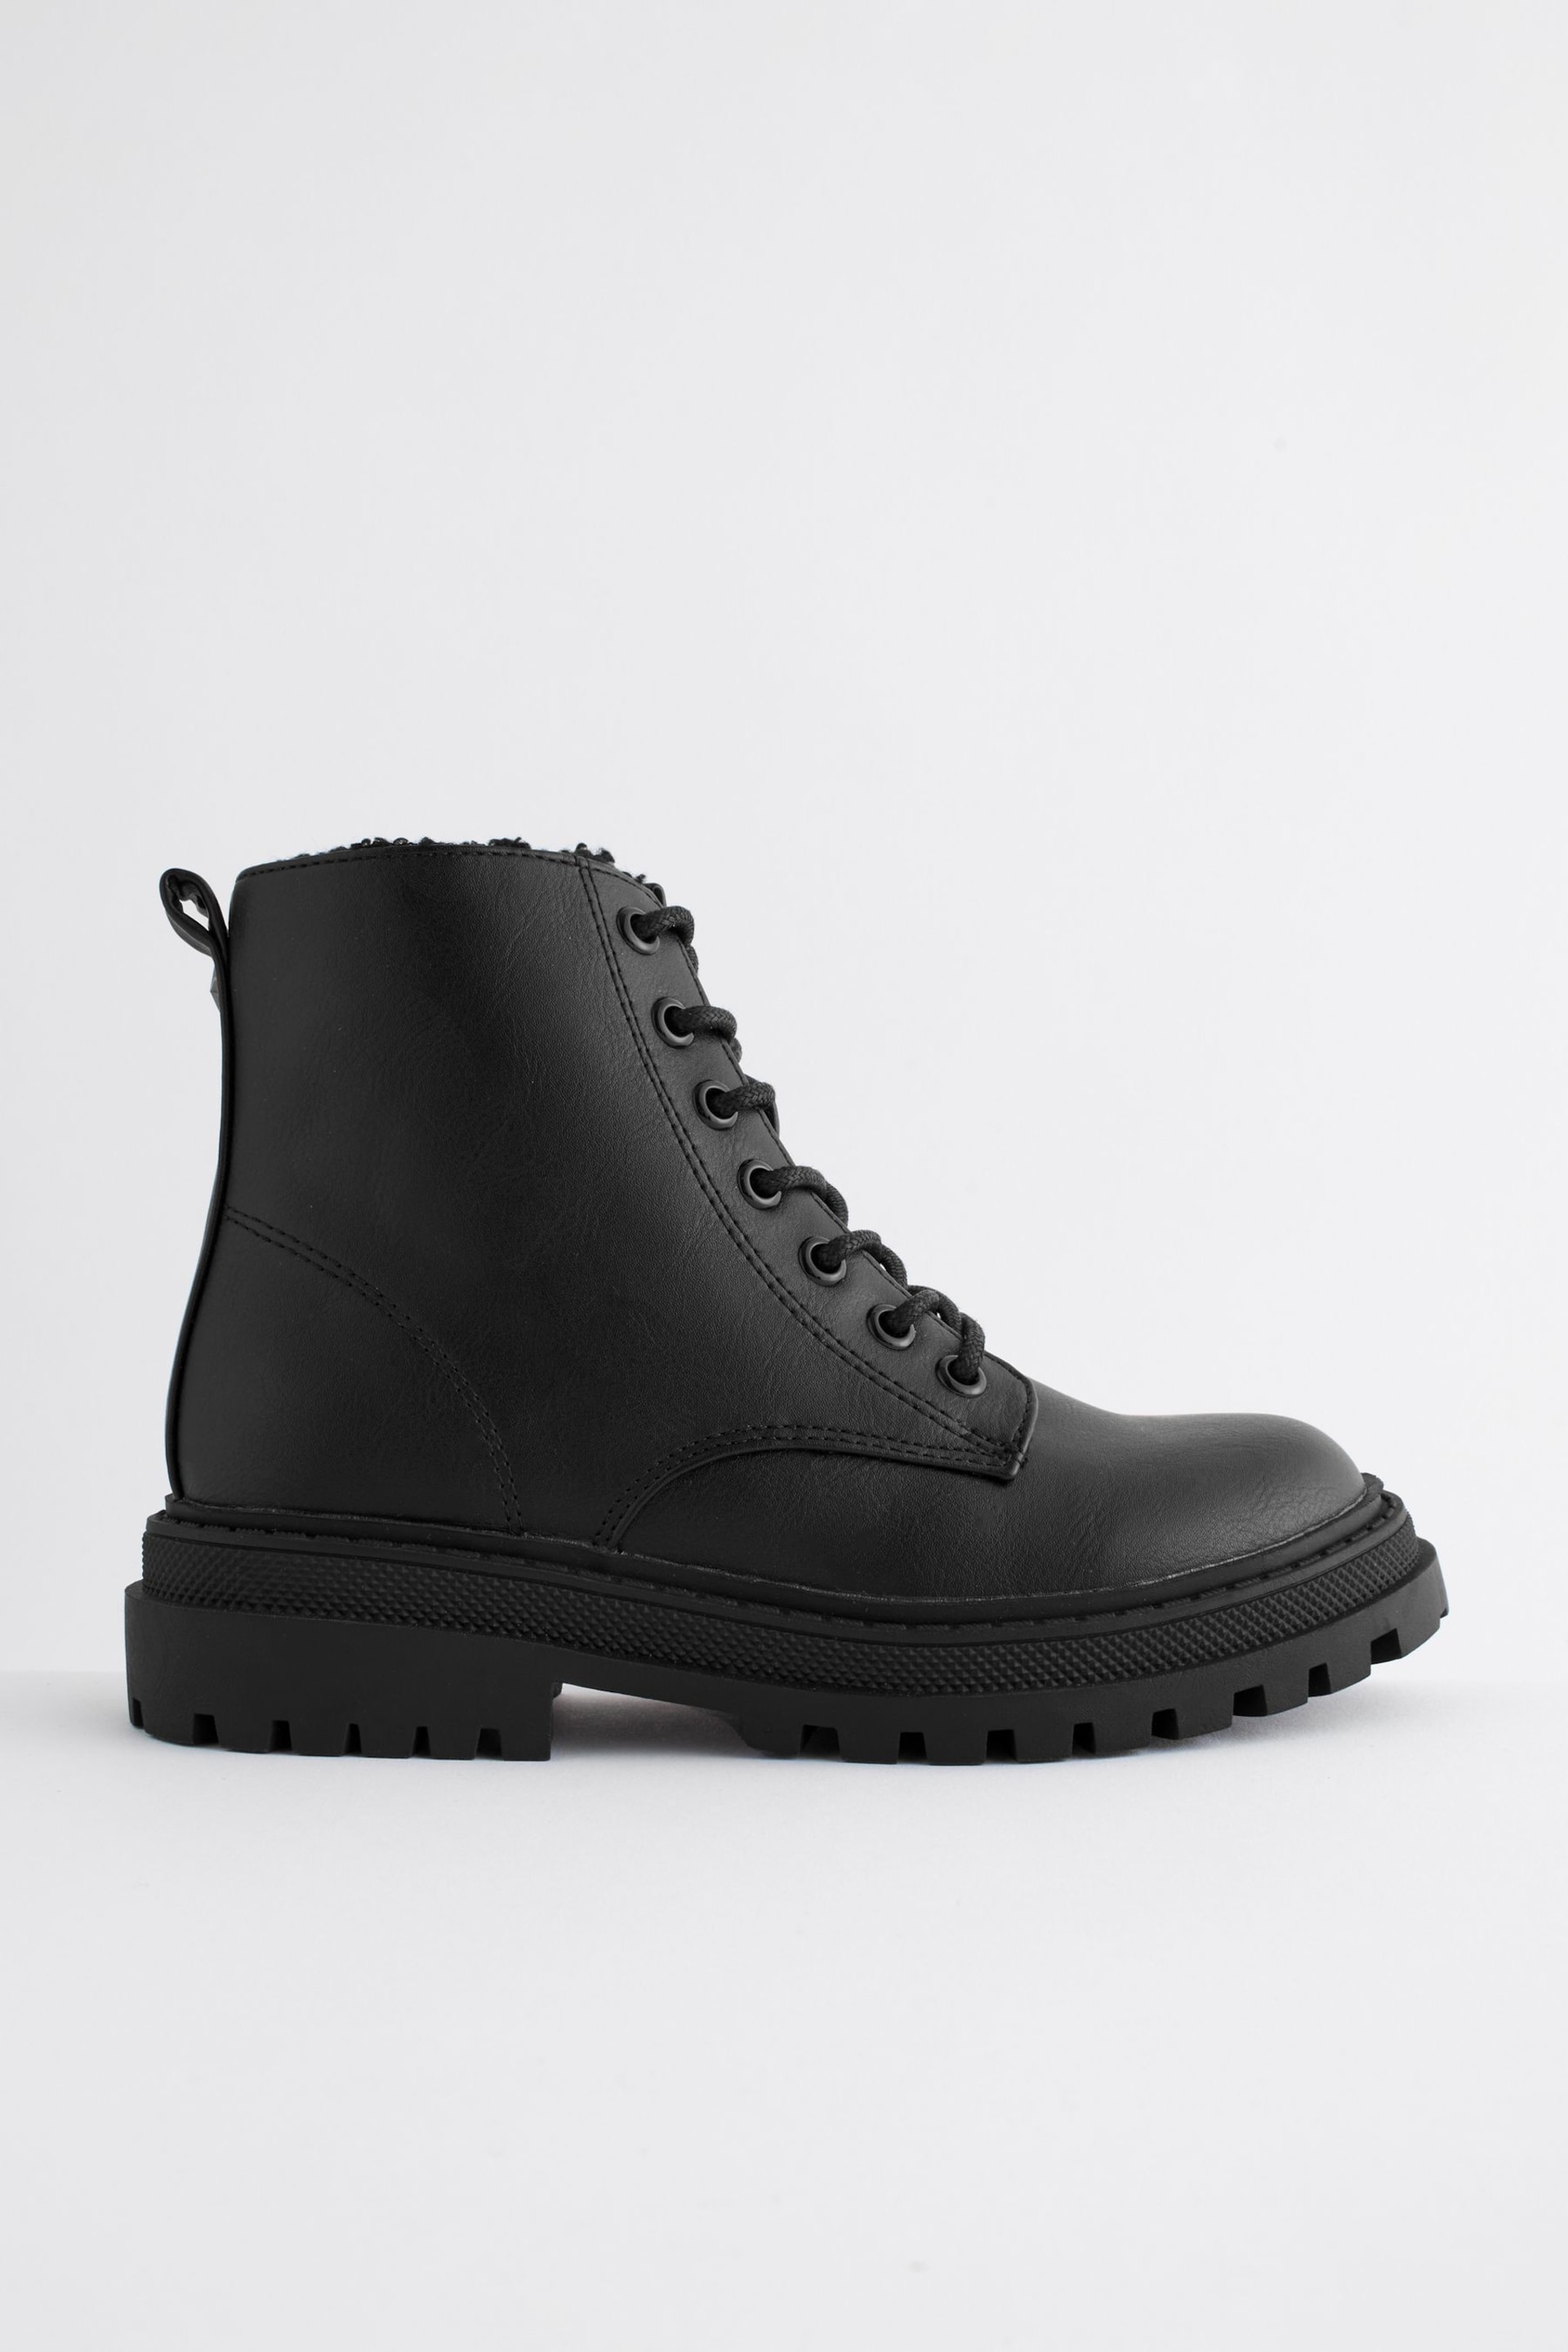 Matt Black Standard Fit (F) Warm Lined Lace Up Boots - Image 1 of 7